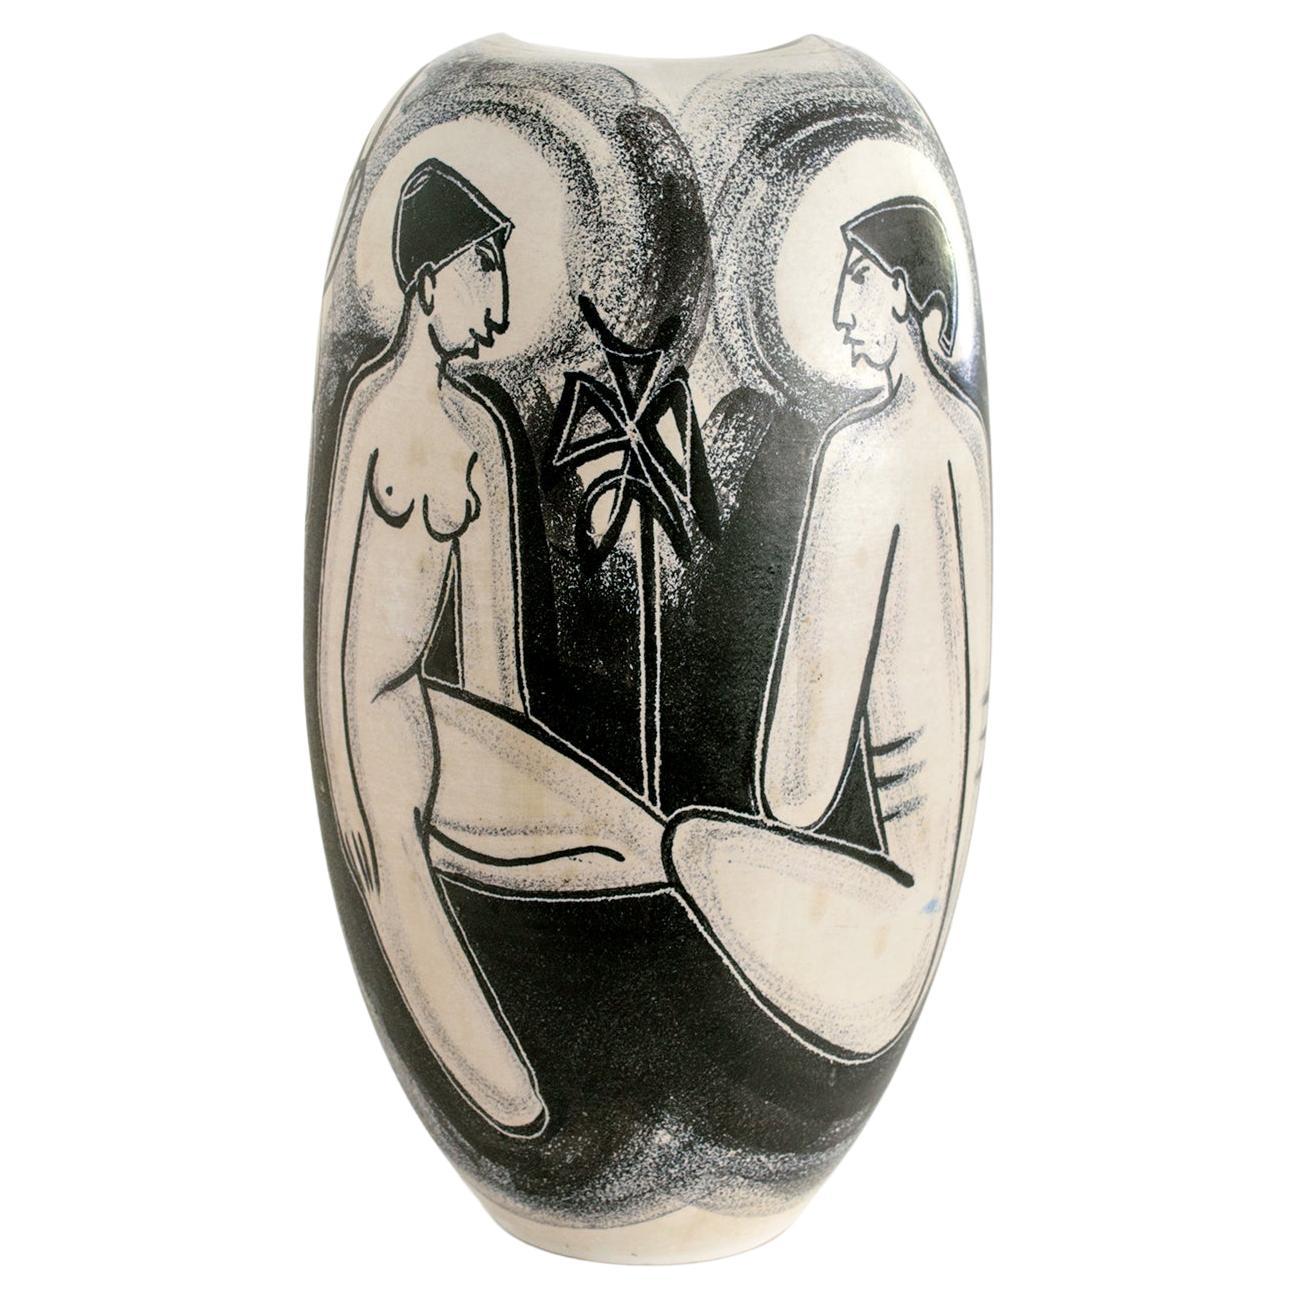 Mette Doller Hand Decorated Scandinavian Modern Vase with Seated Women 1950's For Sale